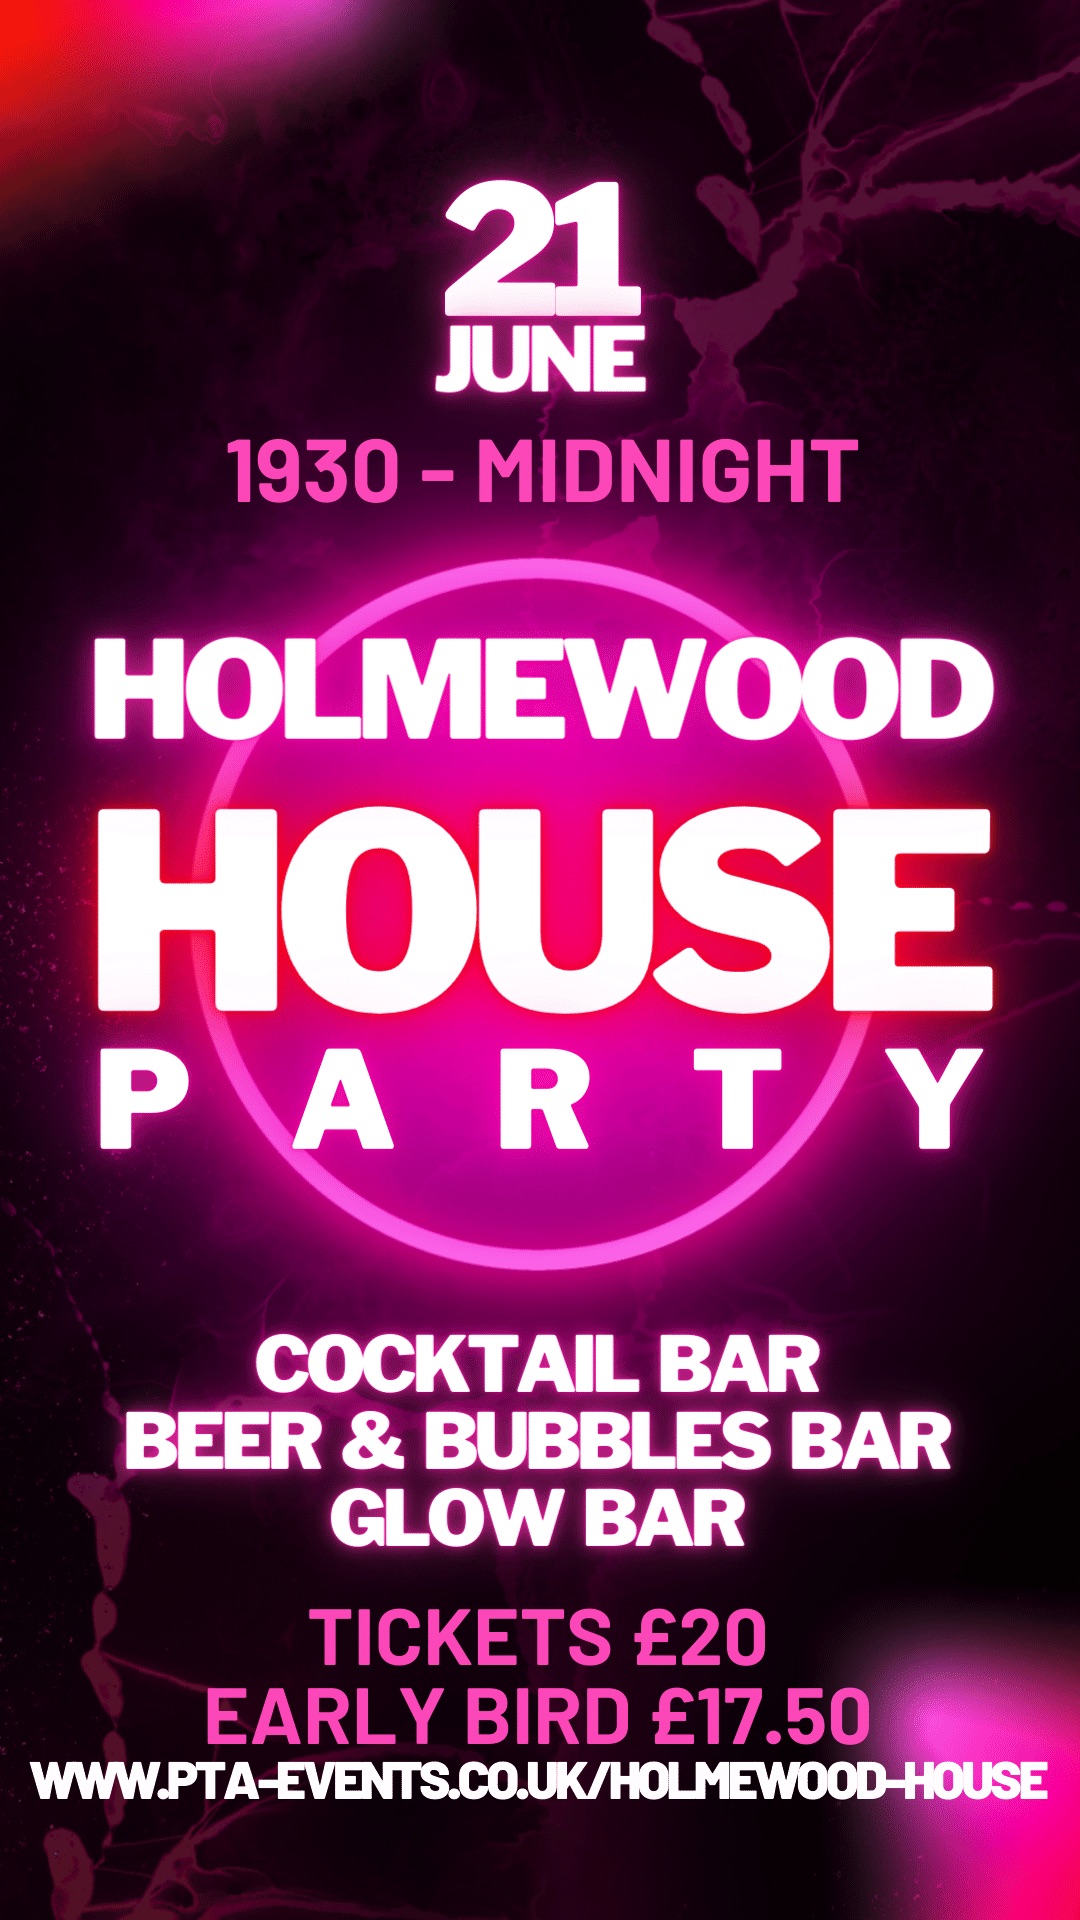 HOLMEWOOD HOUSE PARTY